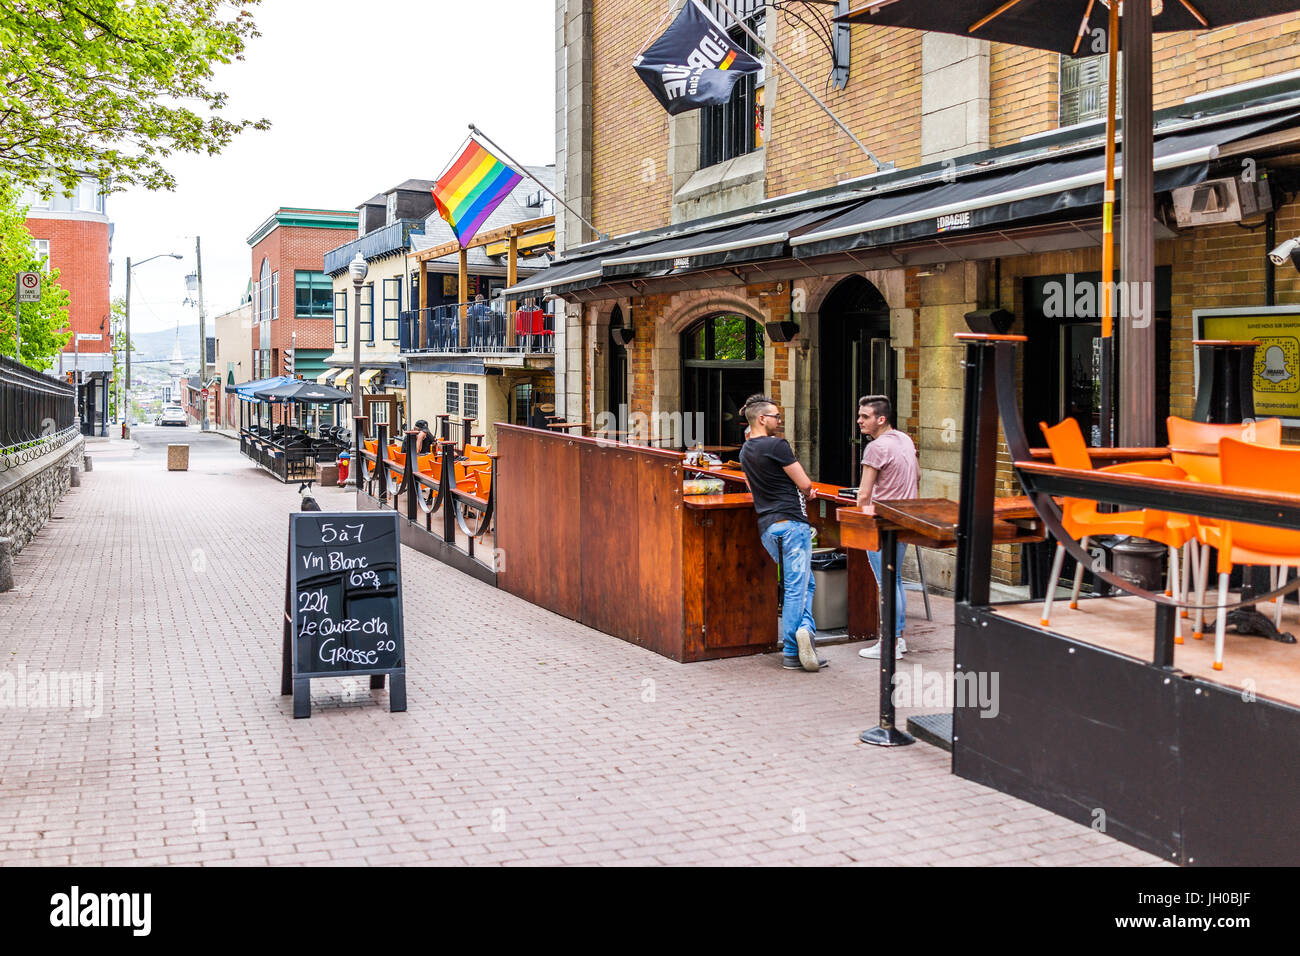 Quebec City, Canada - May 29, 2017: Saint Jean Baptiste area with gay friendly restaurant on Augustin street with menu sign and sidewalk Stock Photo